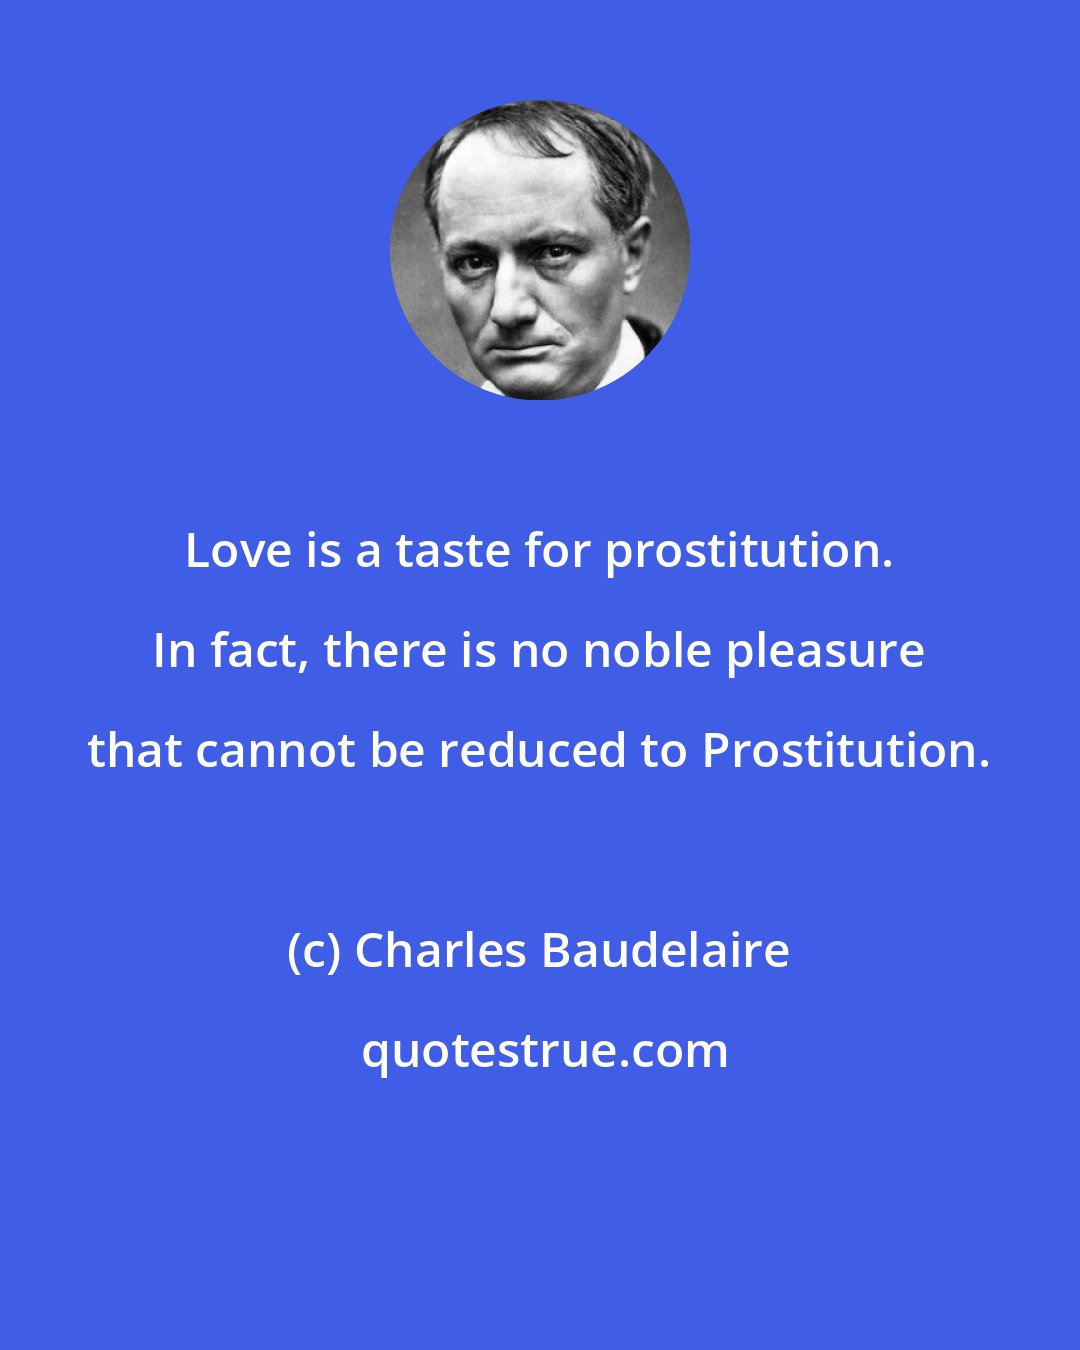 Charles Baudelaire: Love is a taste for prostitution. In fact, there is no noble pleasure that cannot be reduced to Prostitution.